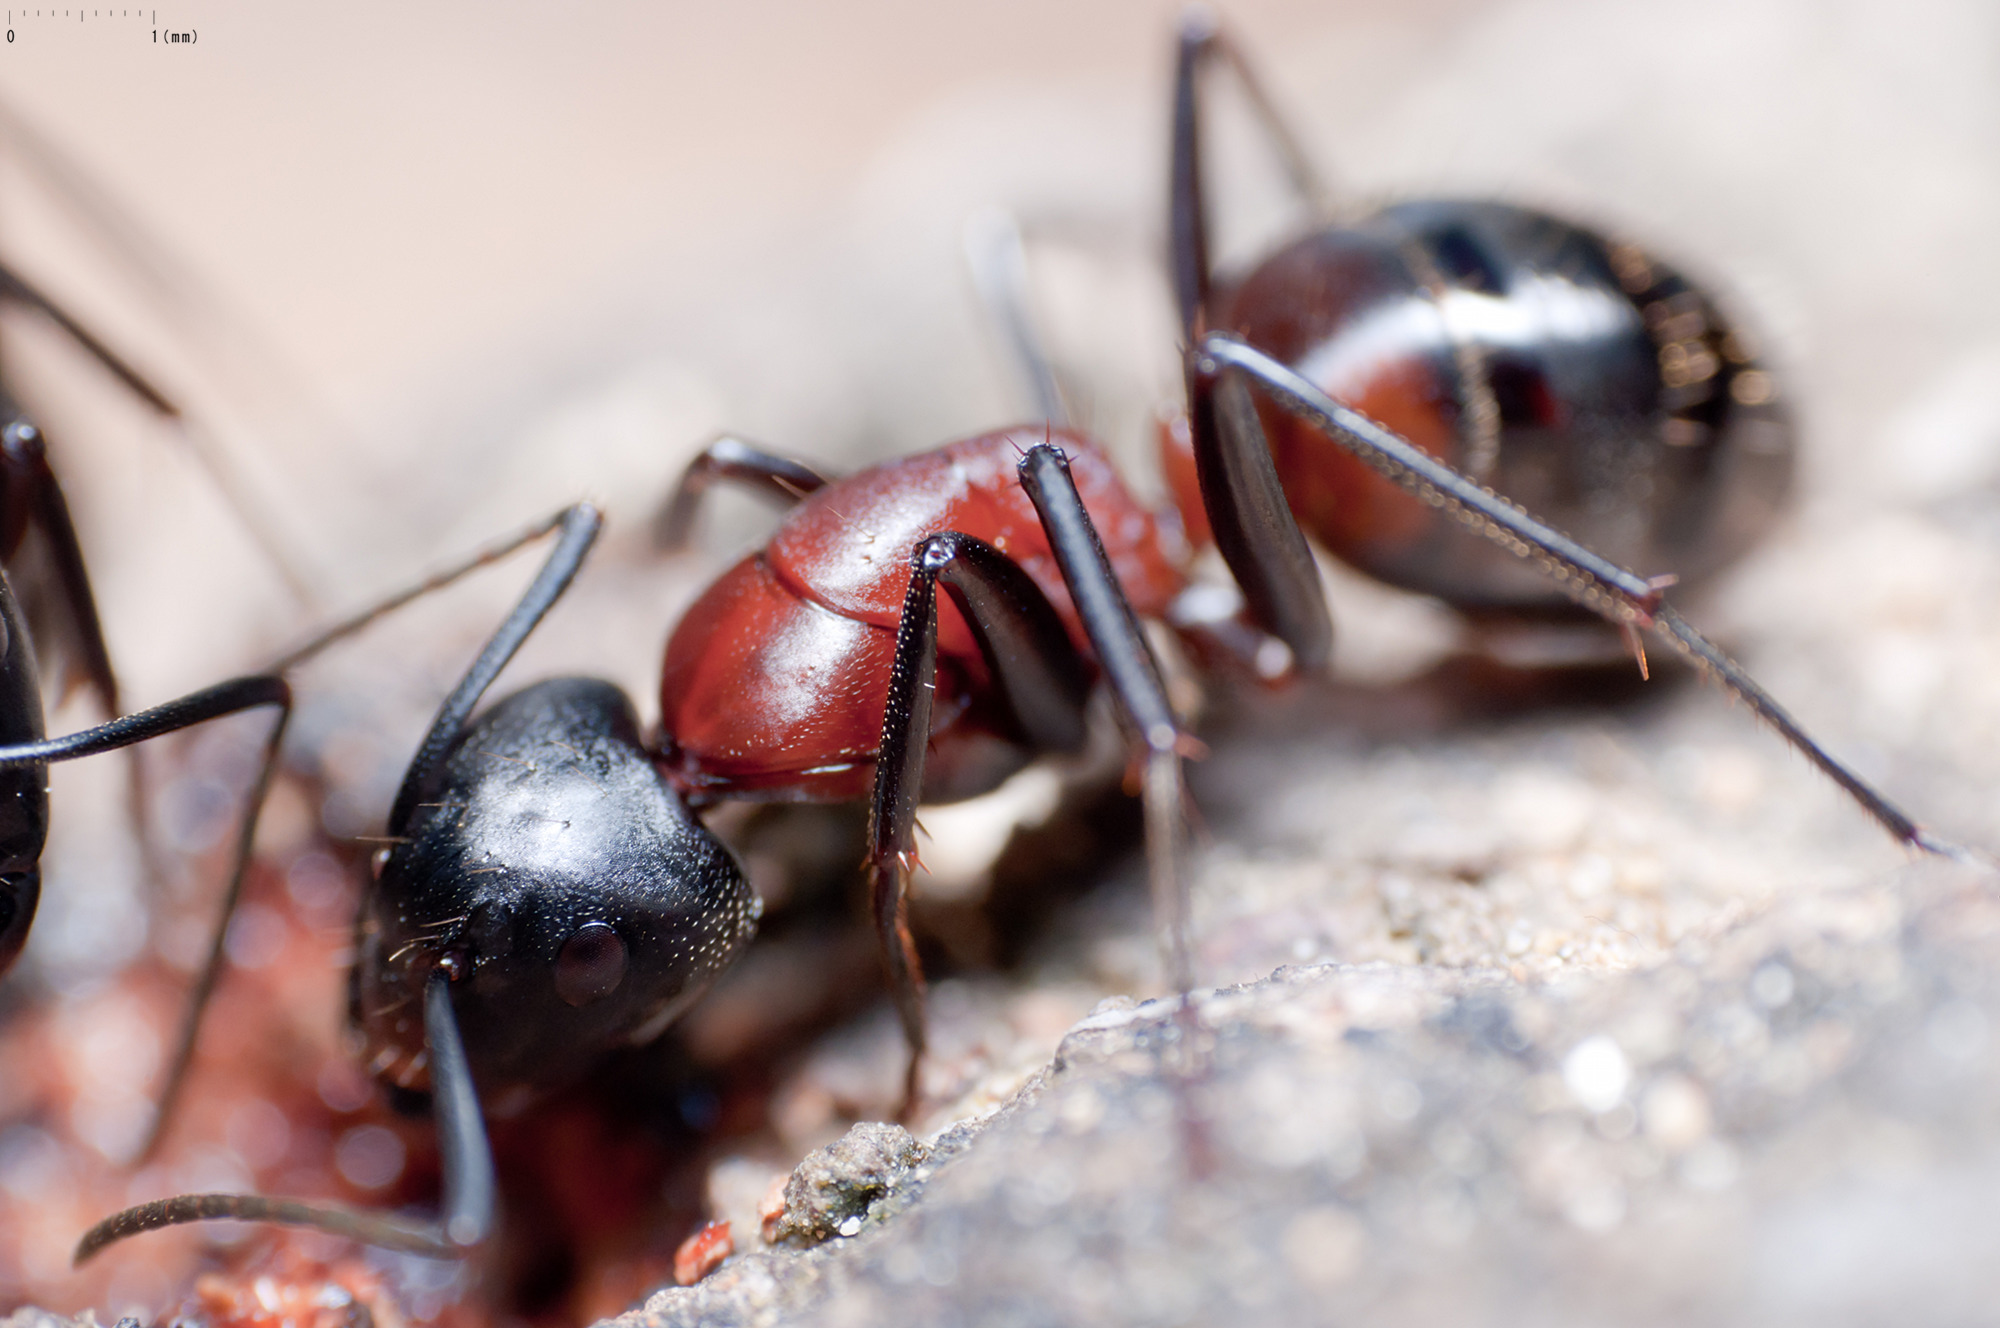 Camponotus obscuripes.jpg